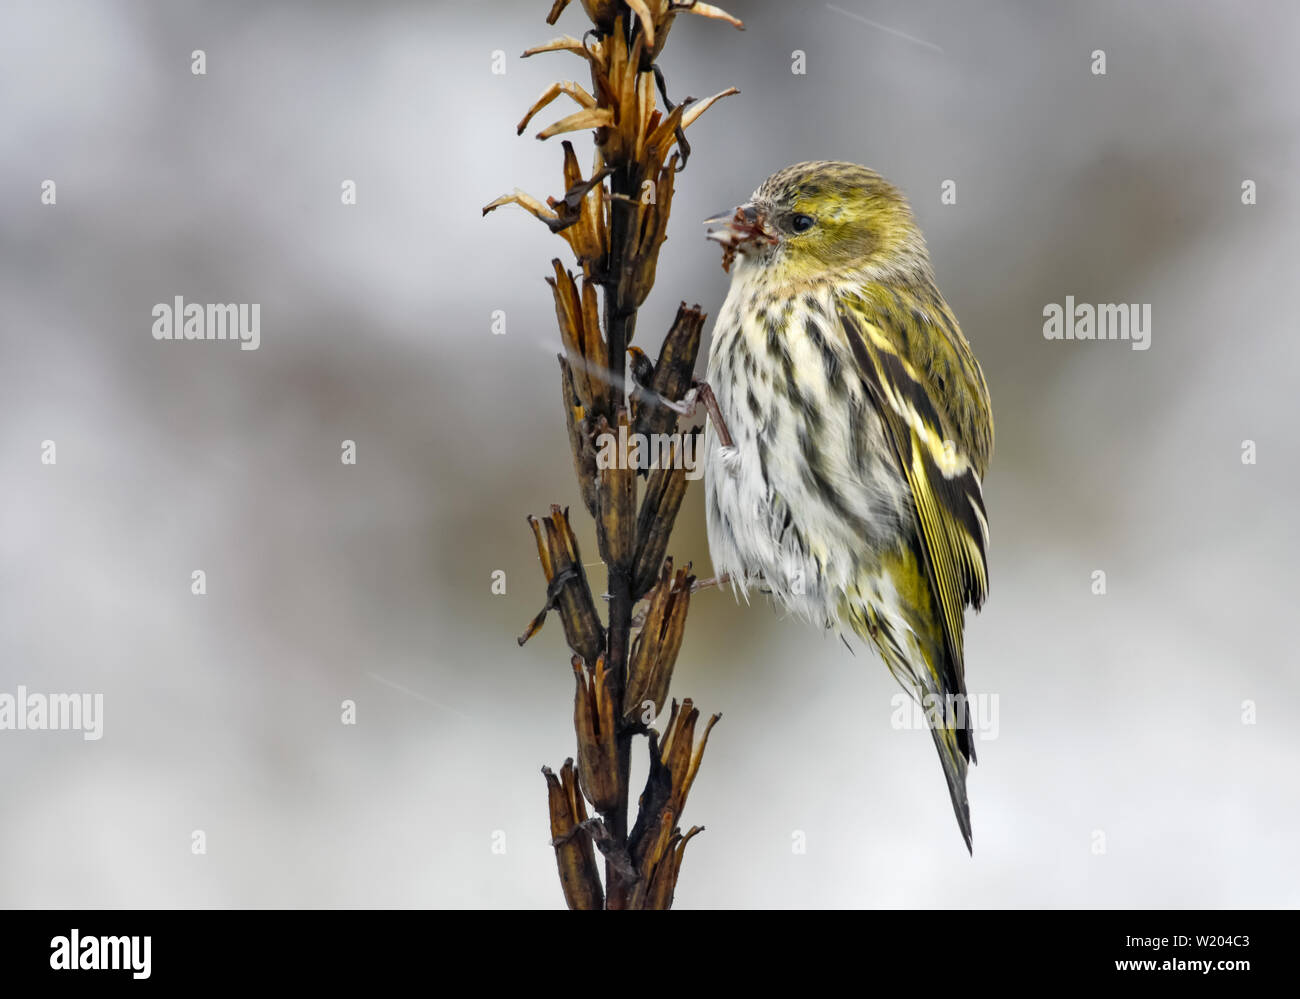 Female Eurasian Siskin sits on herbaceous plant with winter snowflakes Stock Photo